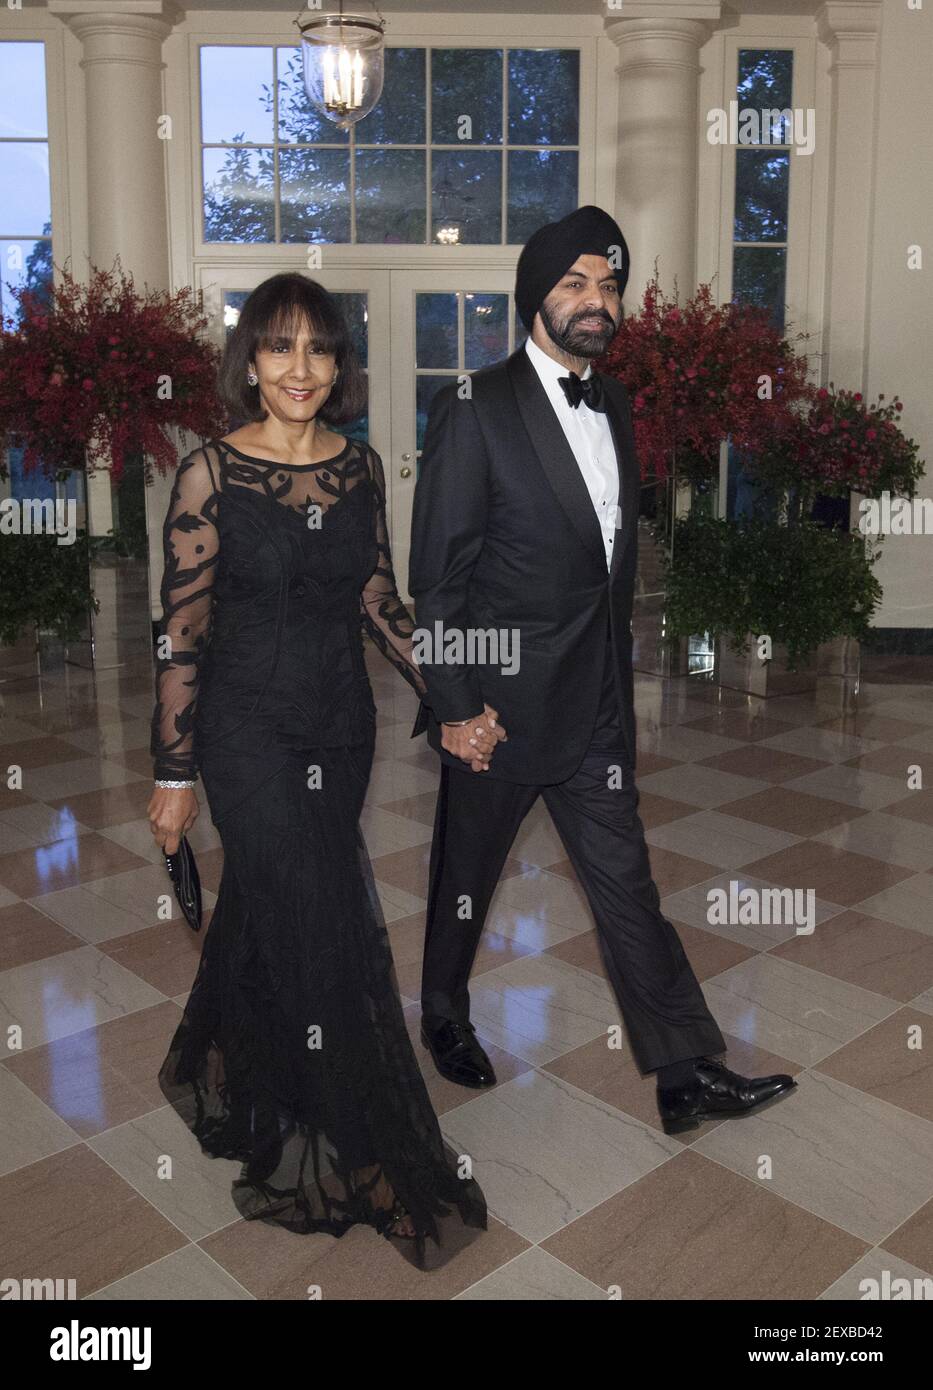 Ajay Banga, President and CEO, Mastercard and Mrs. Ritu Banga arrive at the  State Dinner for China's President President Xi and Madame Peng Liyuan at  the White House in Washington, DC for